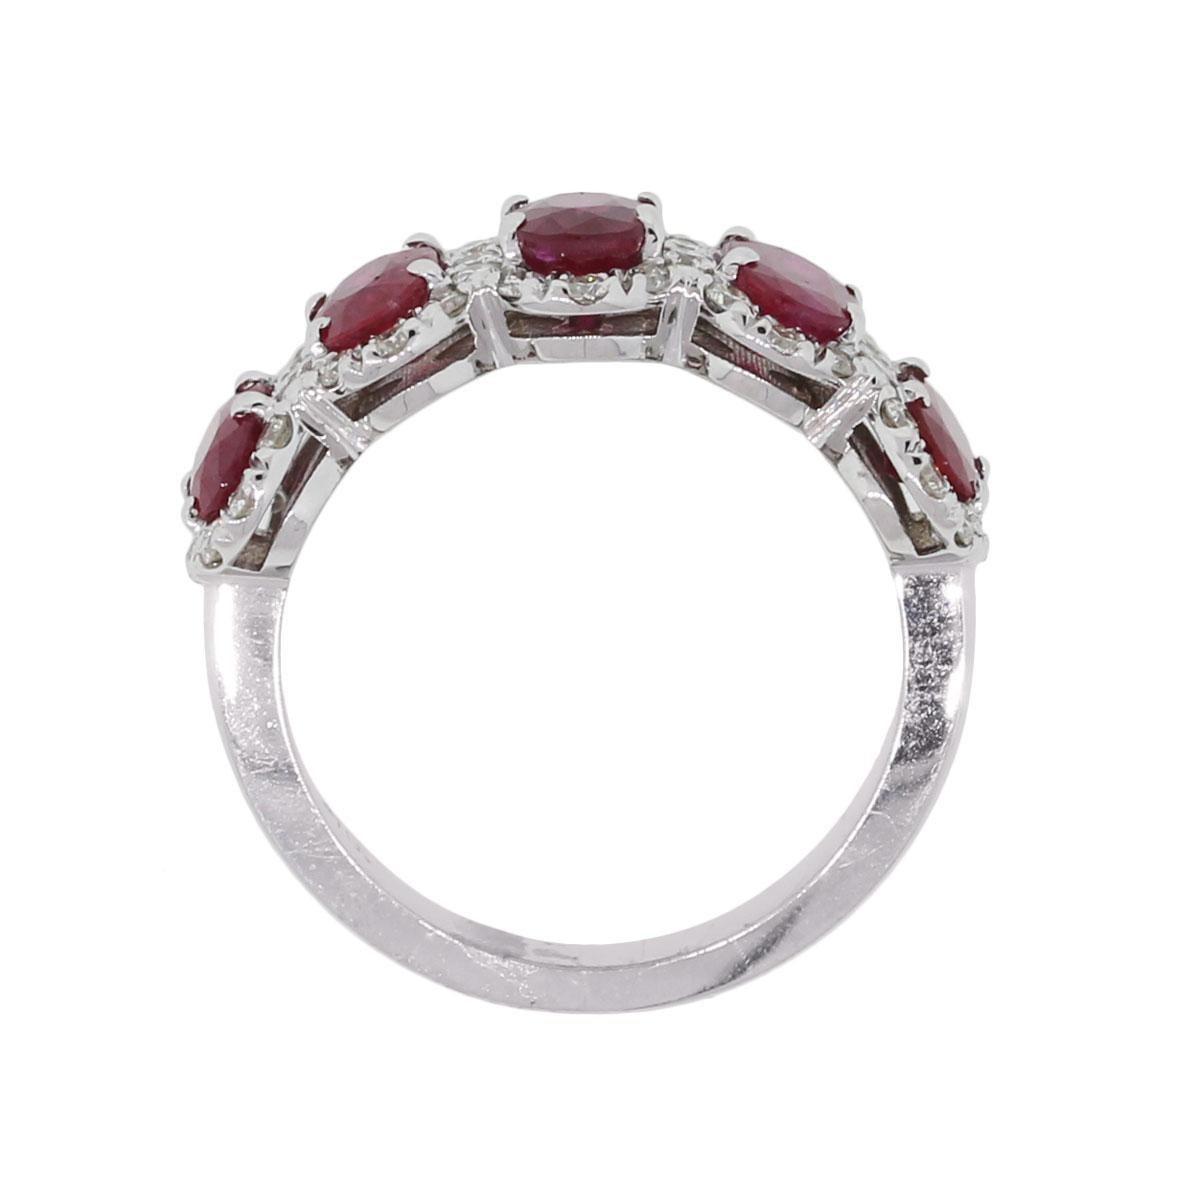 Material: 18k white gold
Diamonds Details: Approximately 0.53ctw of round brilliant diamonds. Diamonds are G/H in color and VS in clarity.
Gemstone Details: Approximately 2.90ctw of oval shape ruby gemstones.
Ring Measurements: 0.89″ x 0.34″ x